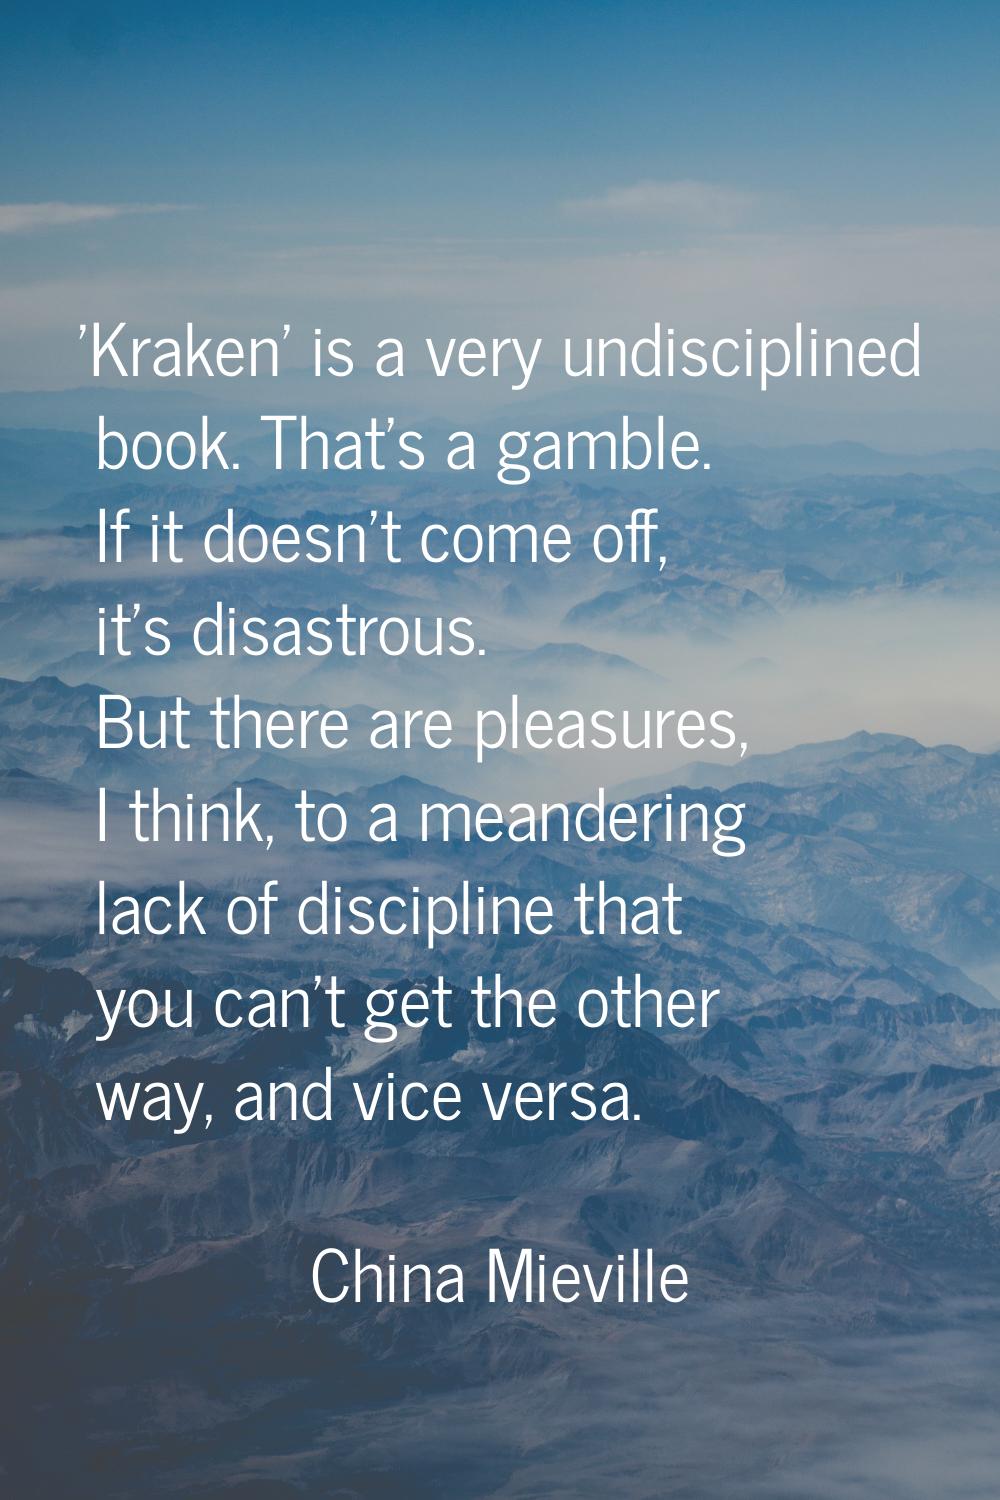 'Kraken' is a very undisciplined book. That's a gamble. If it doesn't come off, it's disastrous. Bu